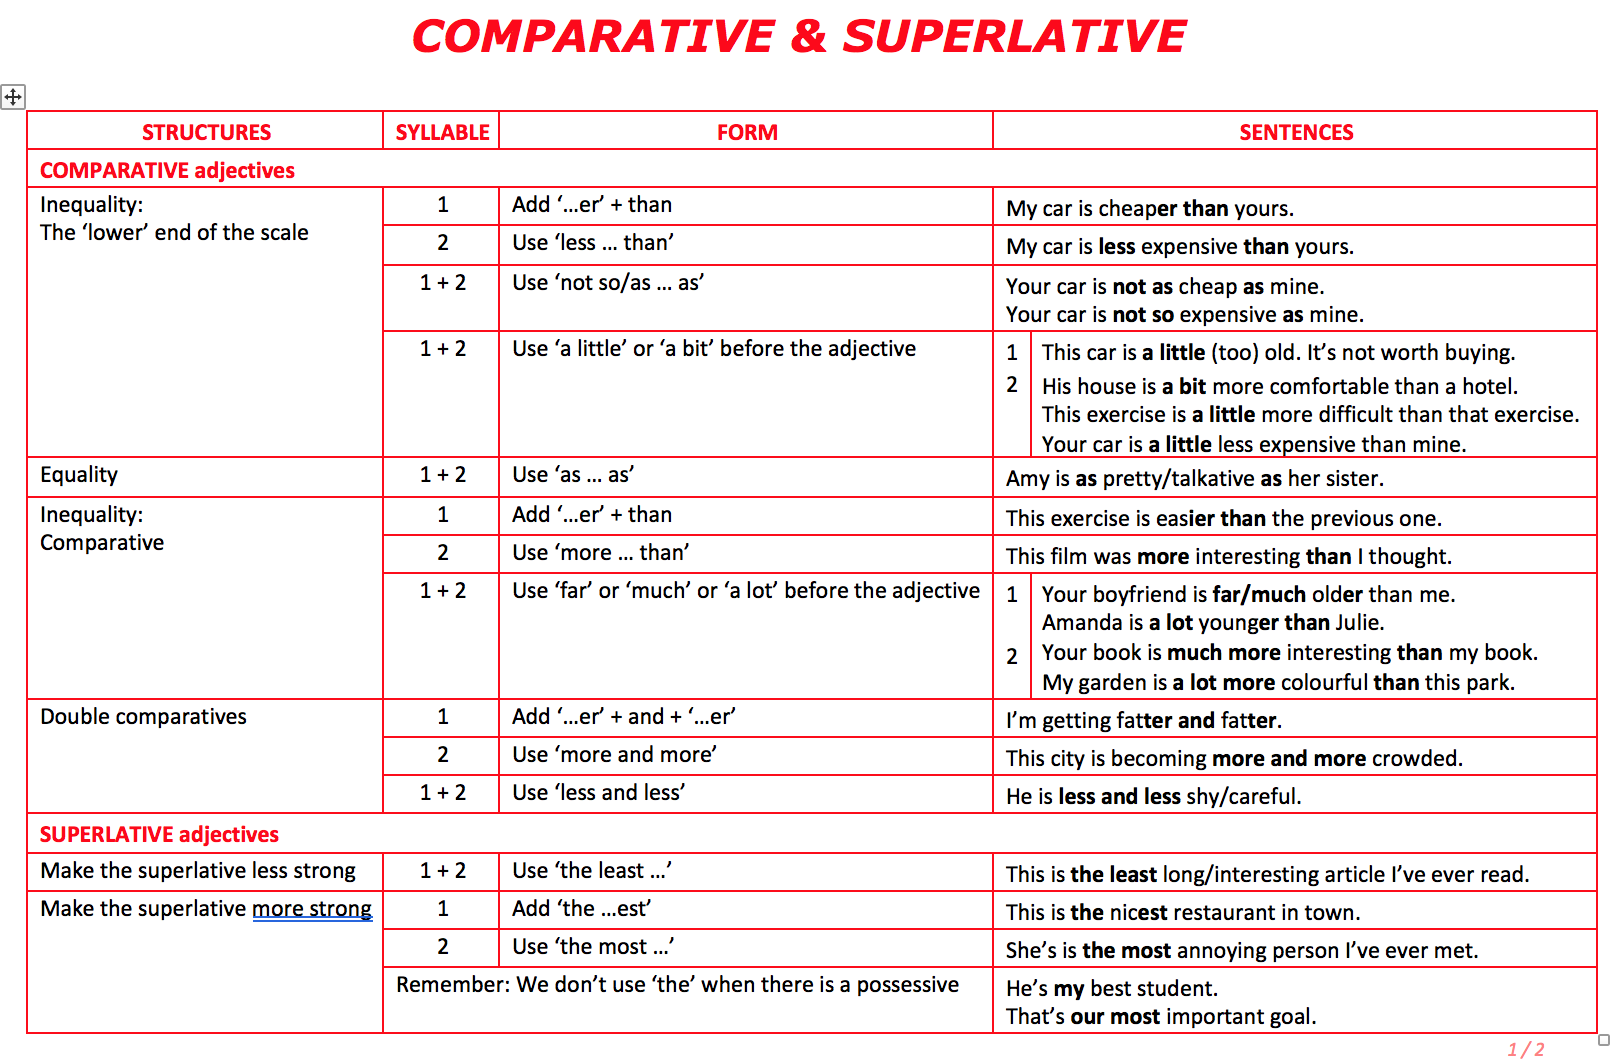 Comparative city. Comparatives and Superlatives правило. Degrees of Comparison of adjectives правило. Comparatives and Superlatives Rule. Adjective Comparative Superlative таблица.